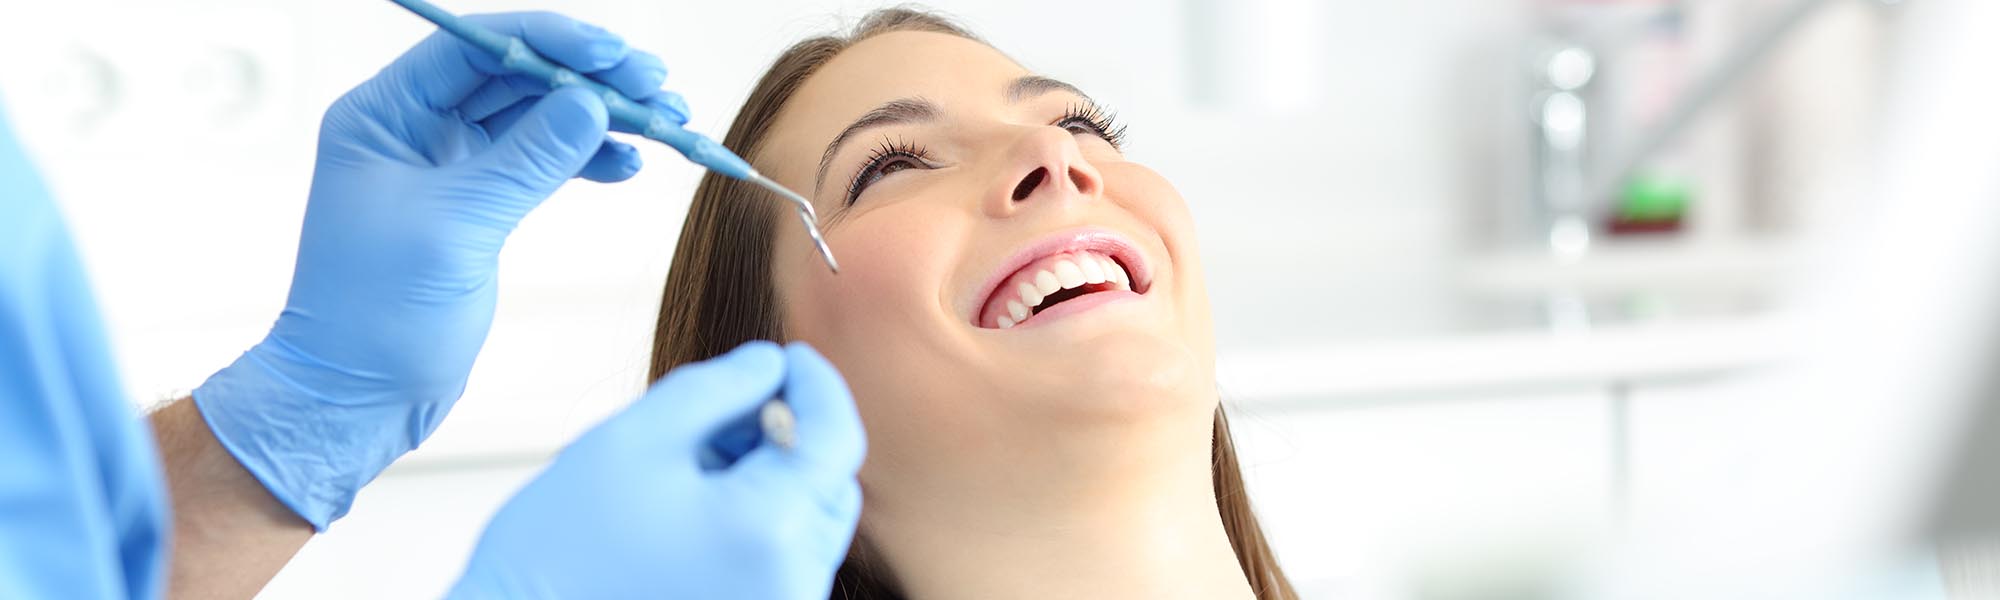 Routine Dental Cleaning in Carson CA